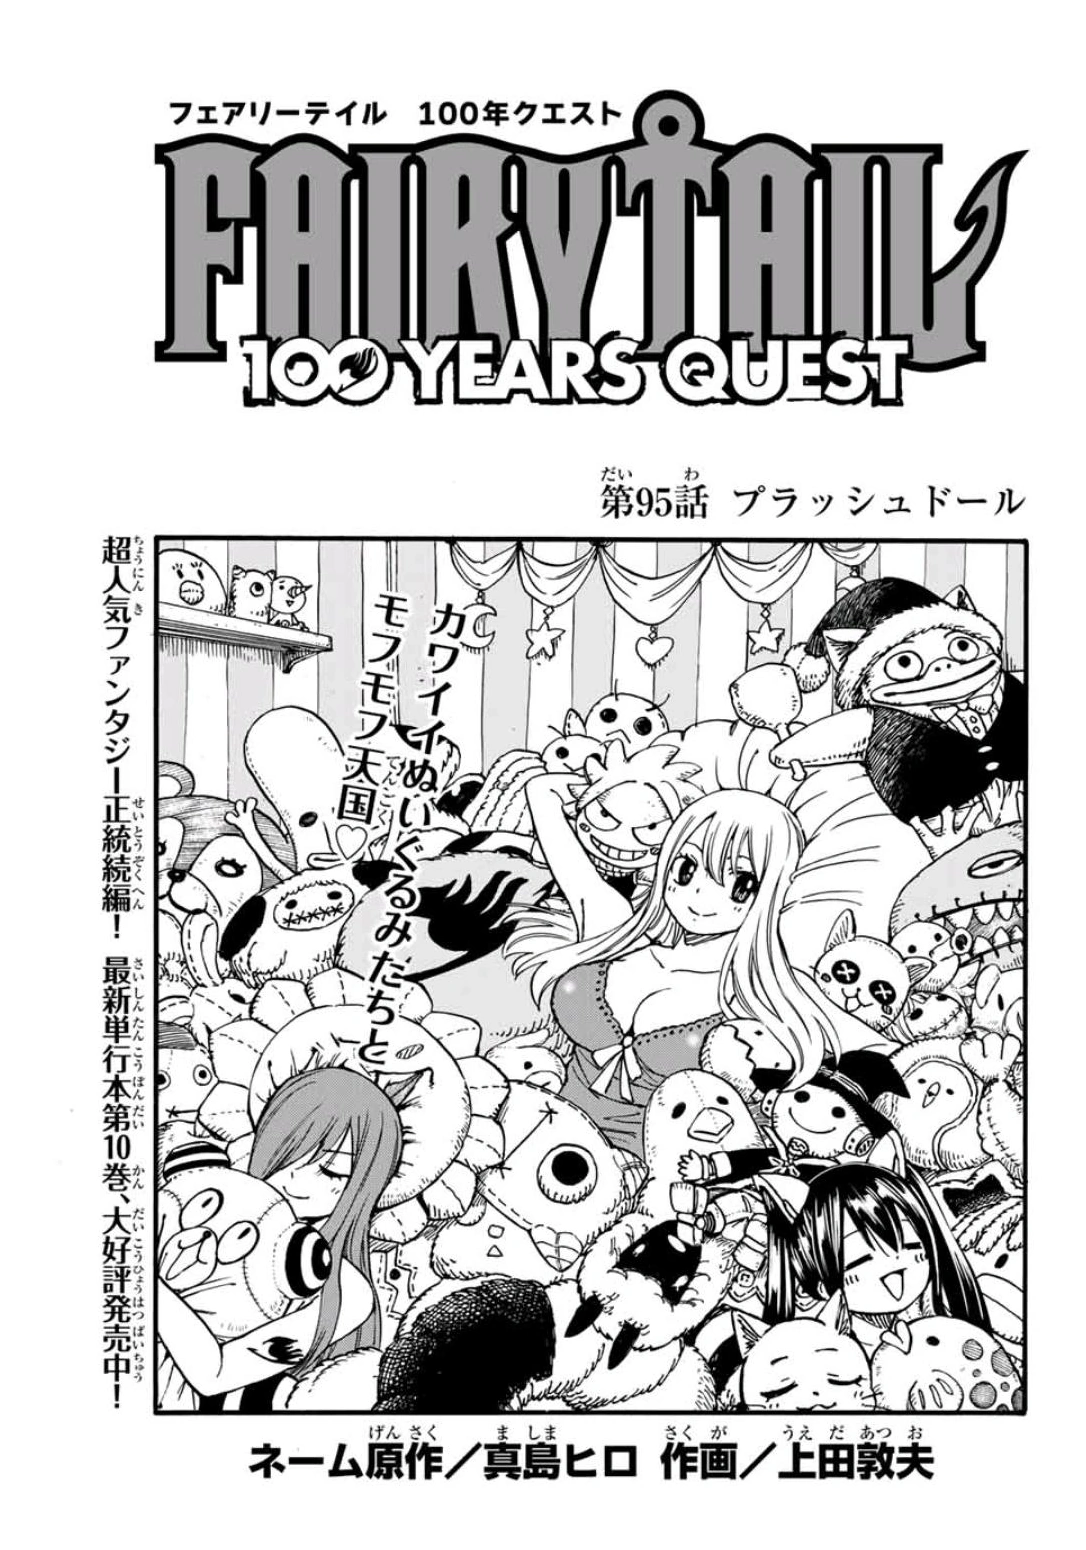 Updated Spoilers For Fairy Tail 100 Years Quest Chapter 113 Raw Scans Storyline Summaries What To Expect In This Chapter Dc News